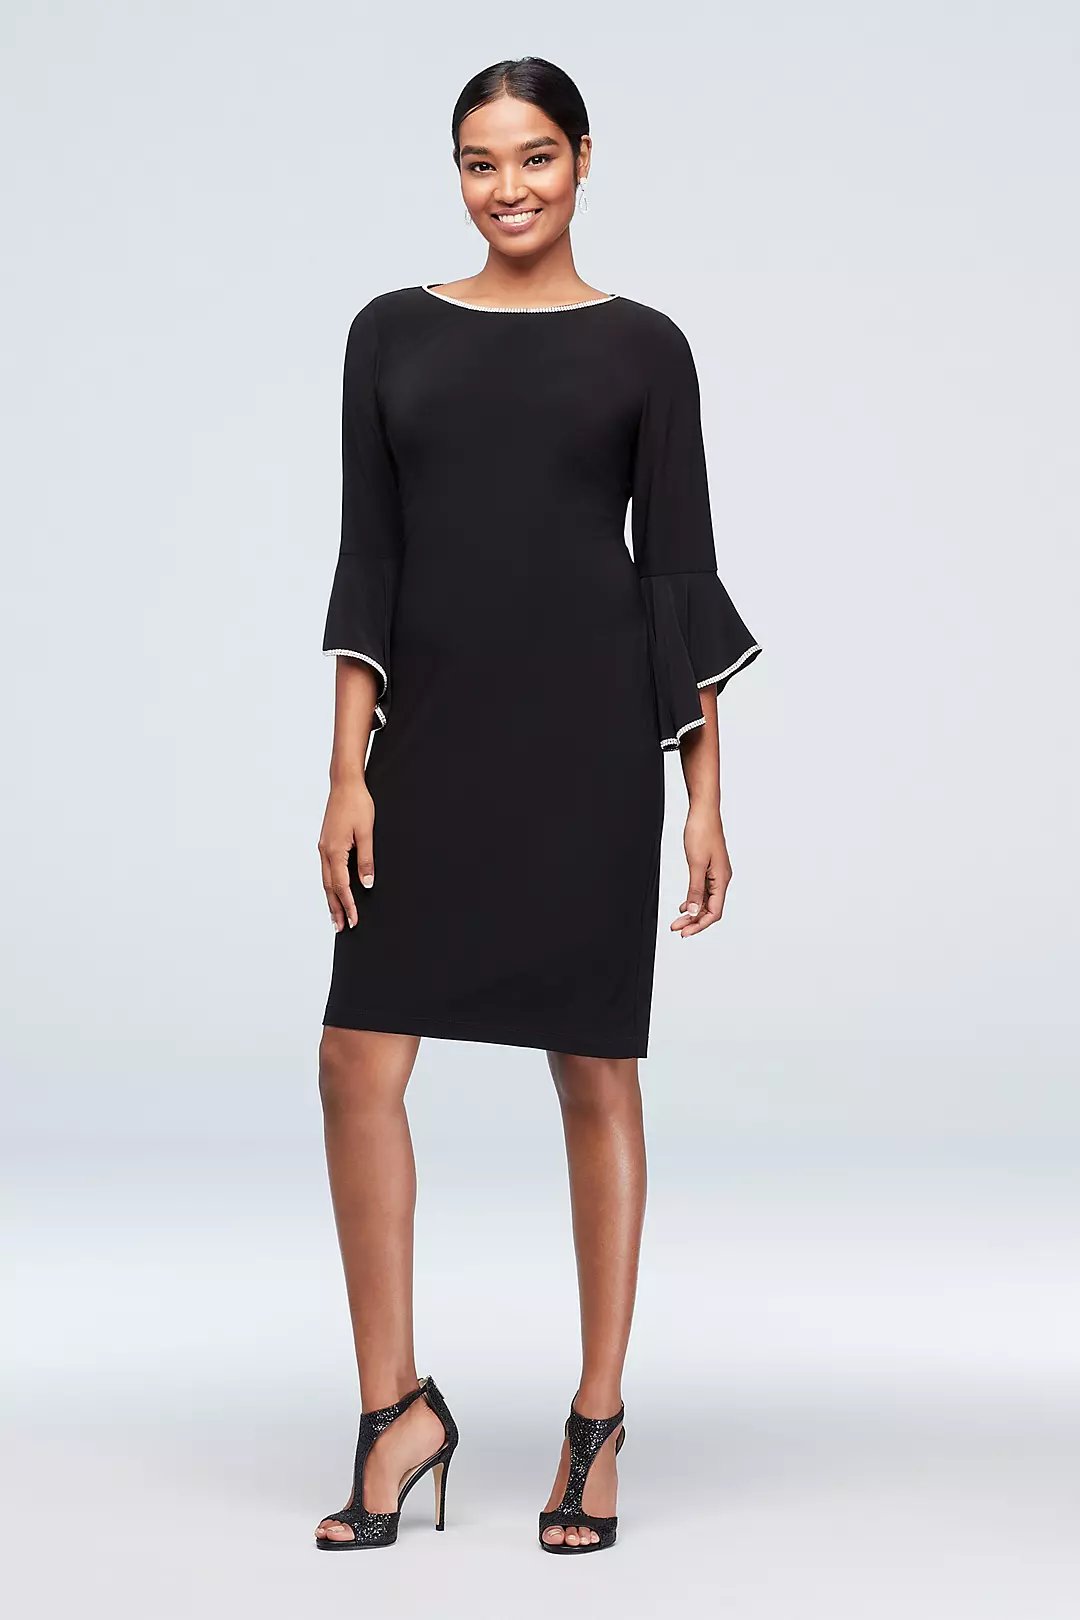 Crystal-Trimmed Bell Sleeve Jersey A-Line Dress Image